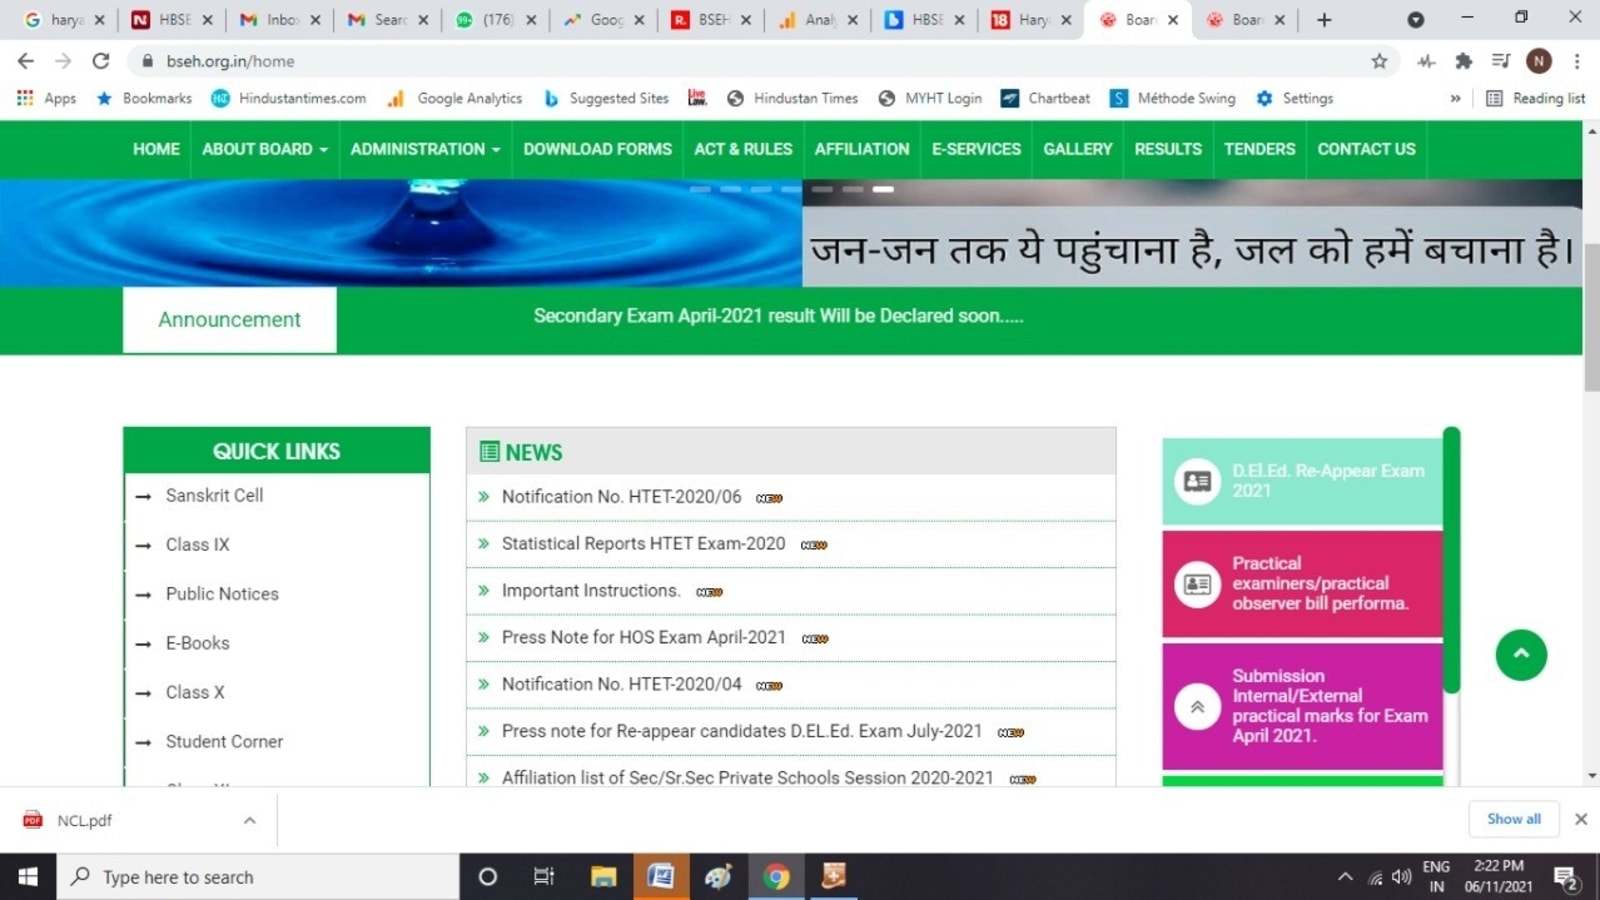 Haryana Board HBSE 10th Result 2021 LIVE Updates: BSEH Class 10 results soon